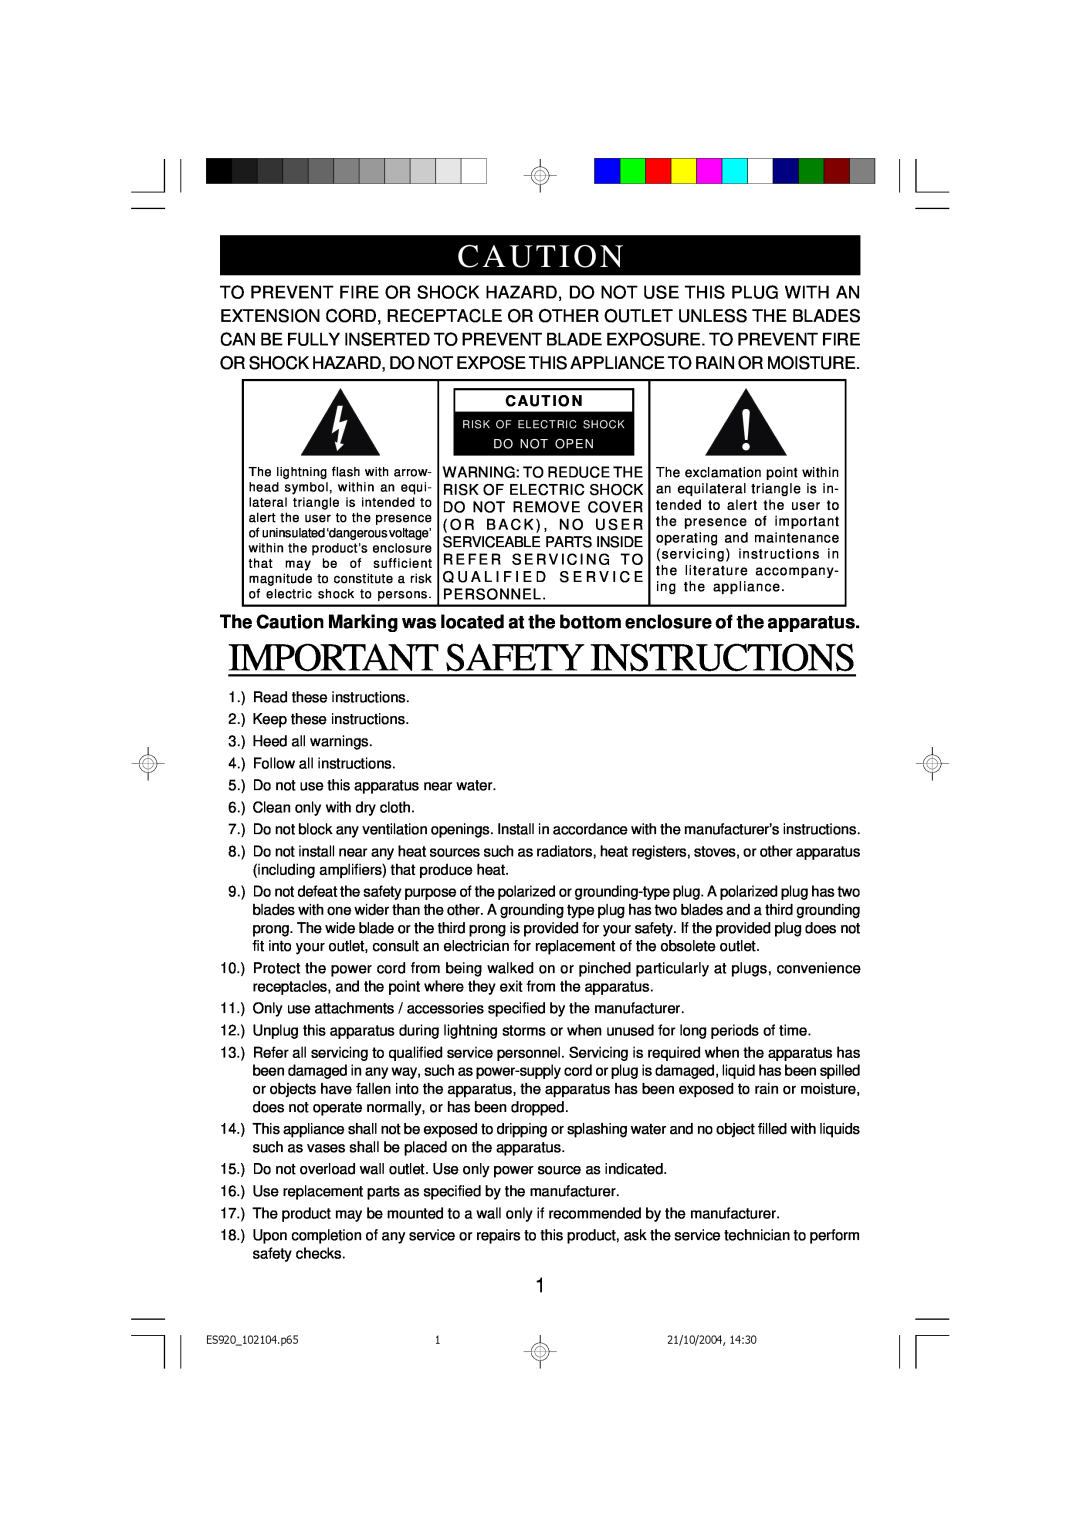 Emerson ES920 owner manual Important Safety Instructions, Caut I On, Caut I O N 